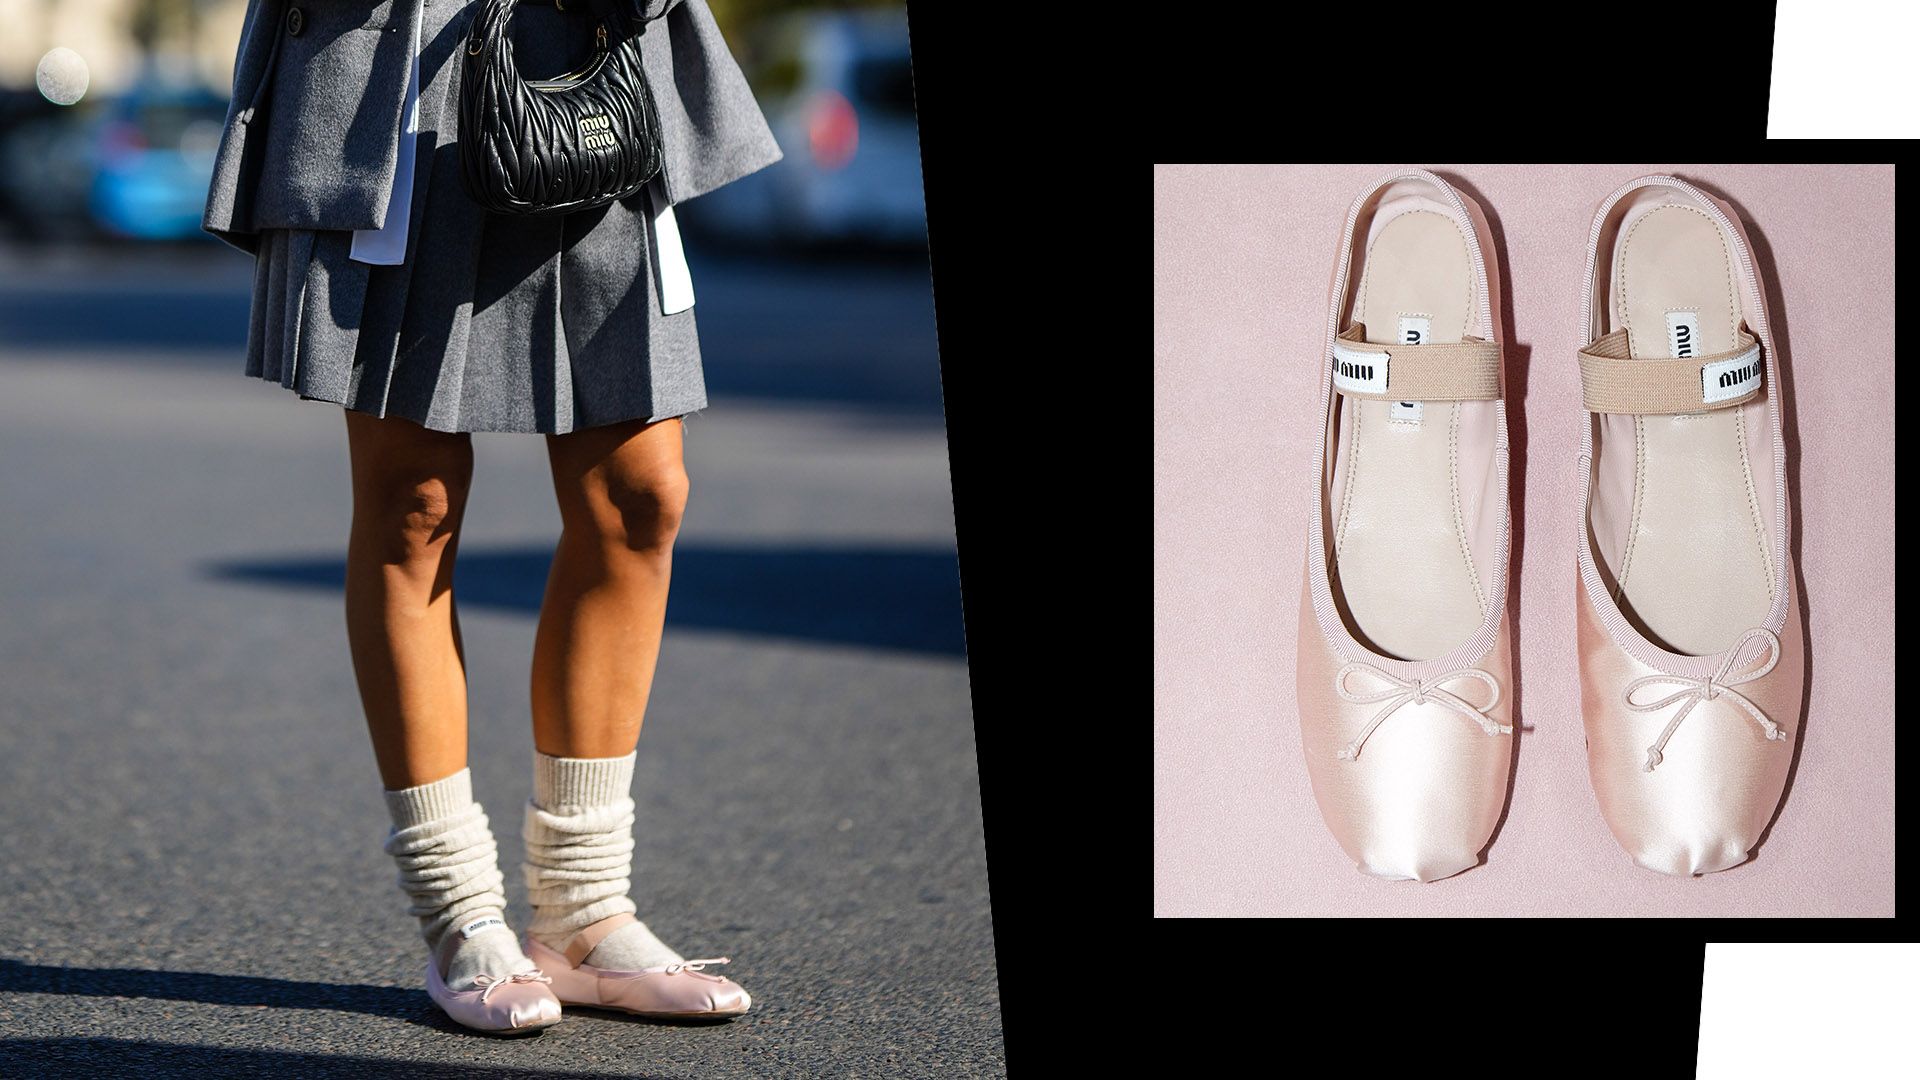 Ballet Pumps Are Back In Fashion And Miu Miu's Cult Styles Are